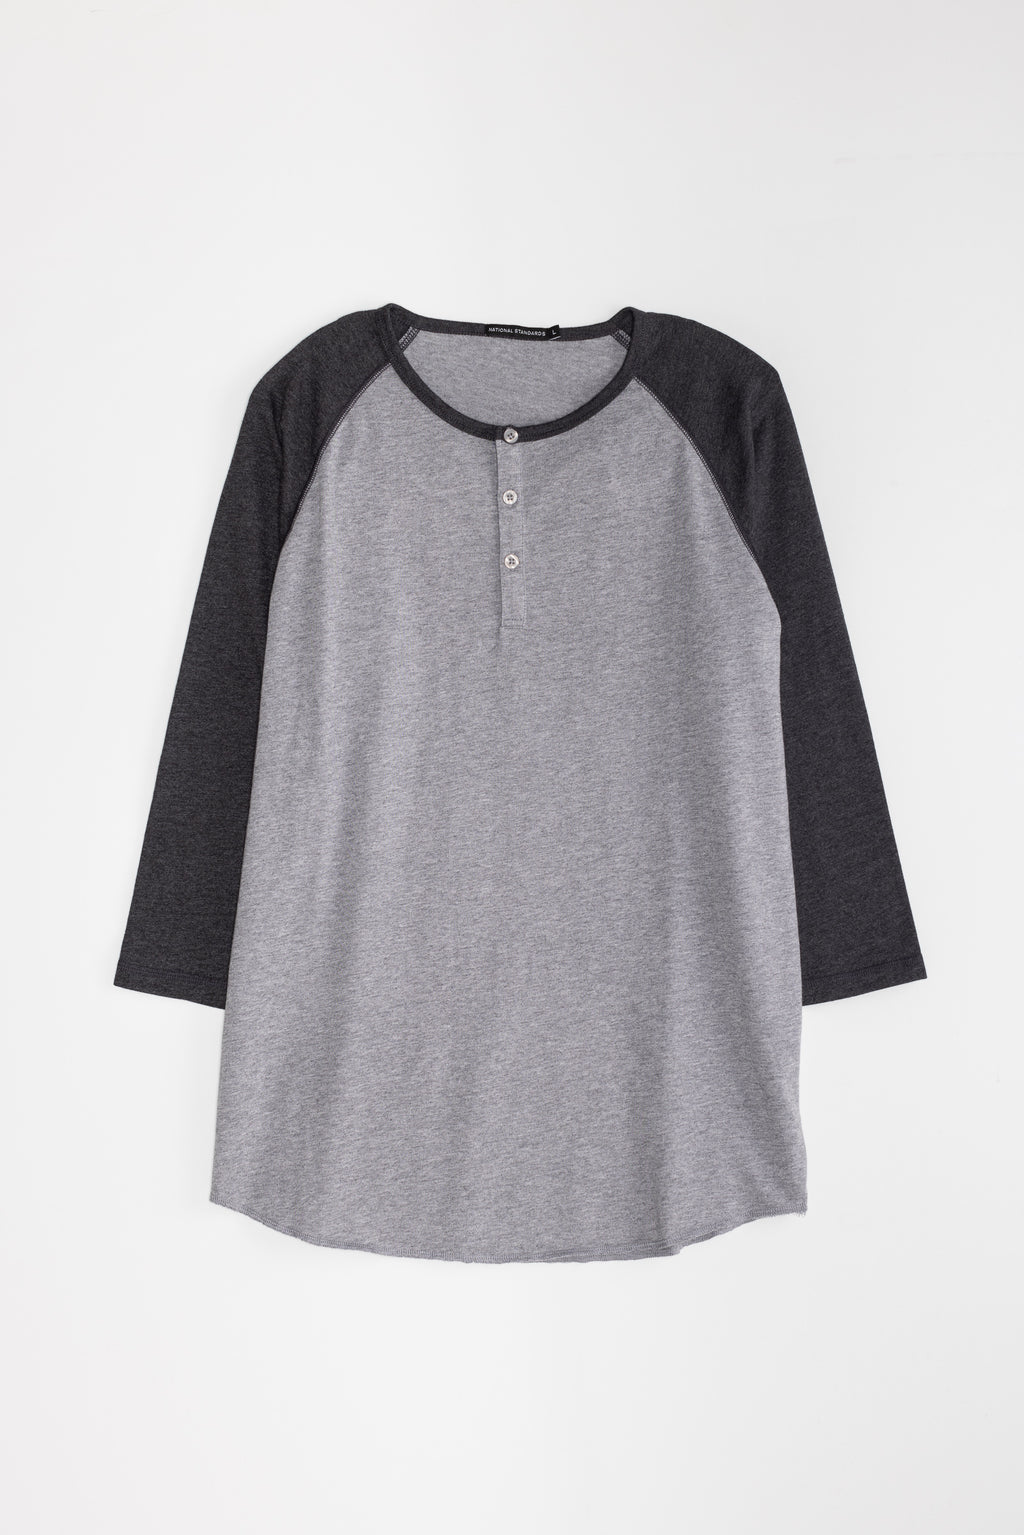 NS2122-9 Tri-blend 3/4 henley in Grey with Charcoal sleeves 01